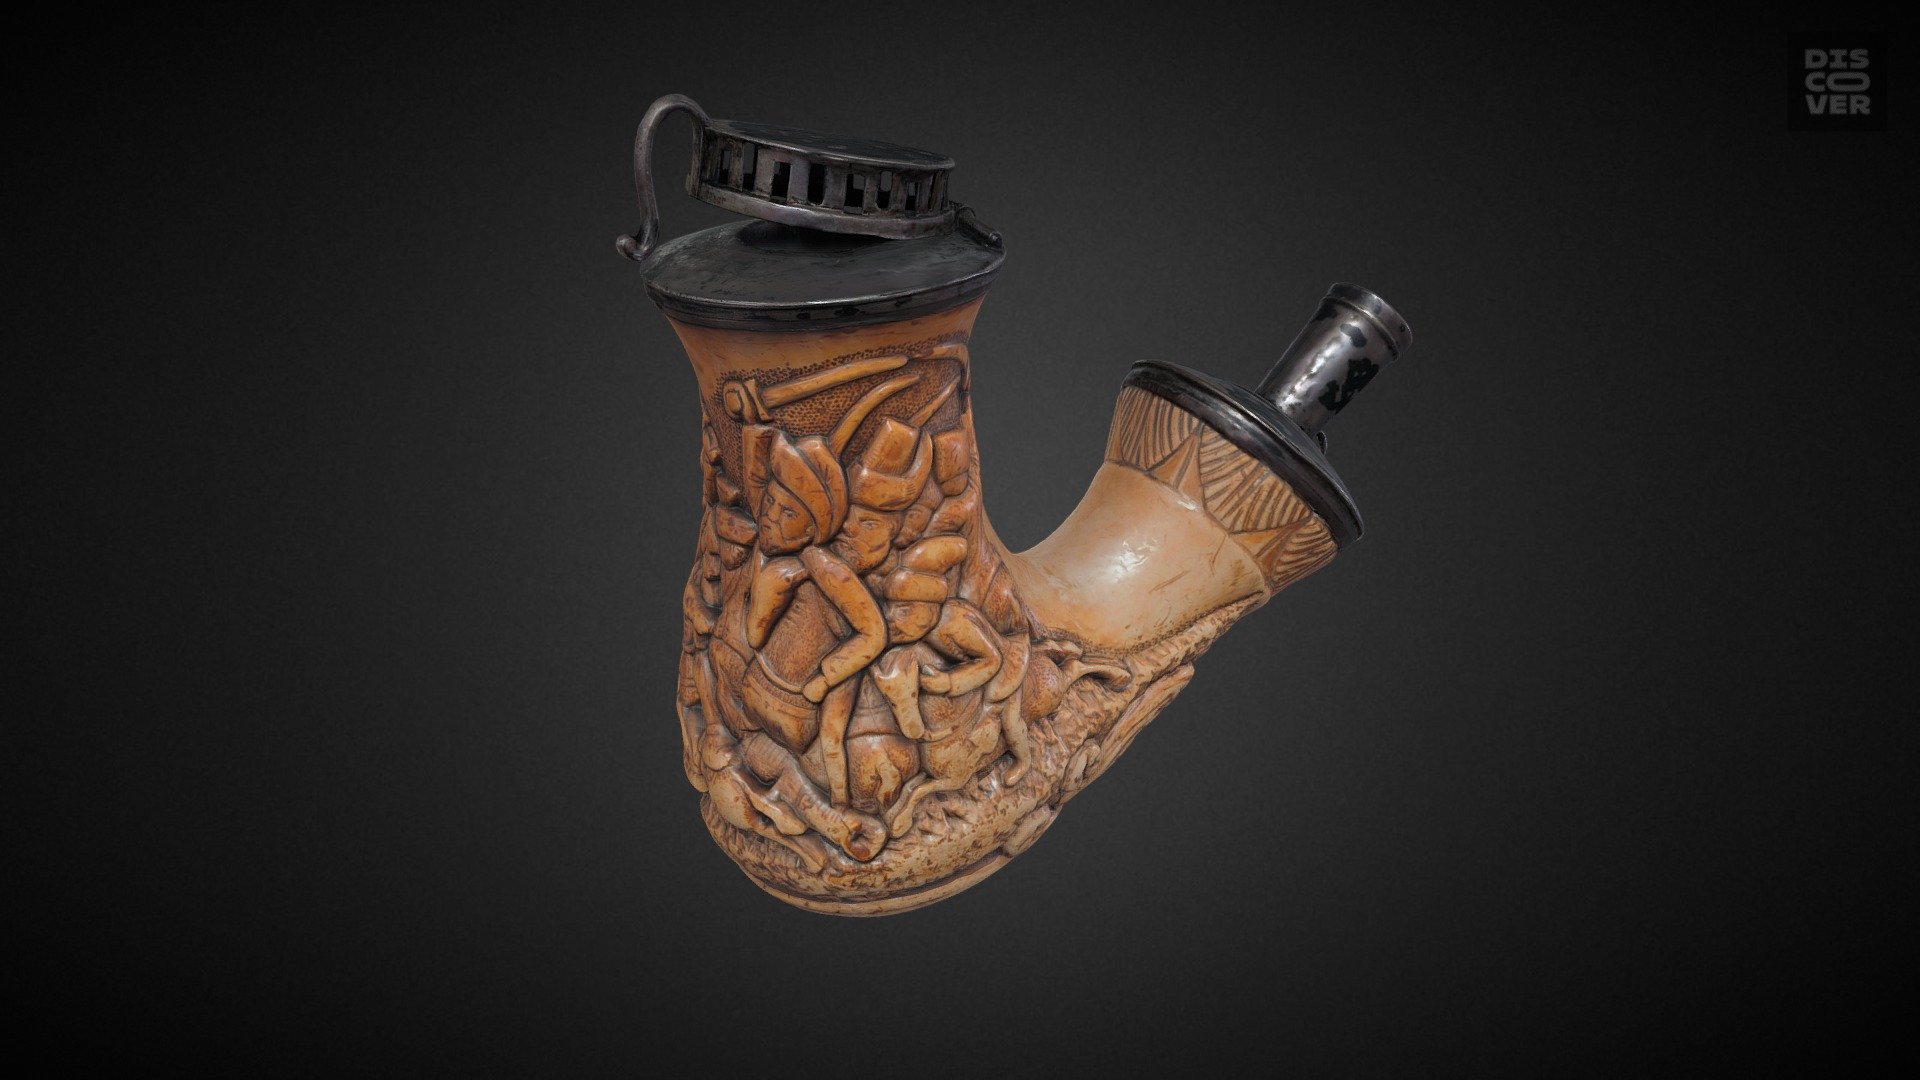 Ukrainian carved wodden smoking pipe - Люлька - 3D model by eMuseum 3d model